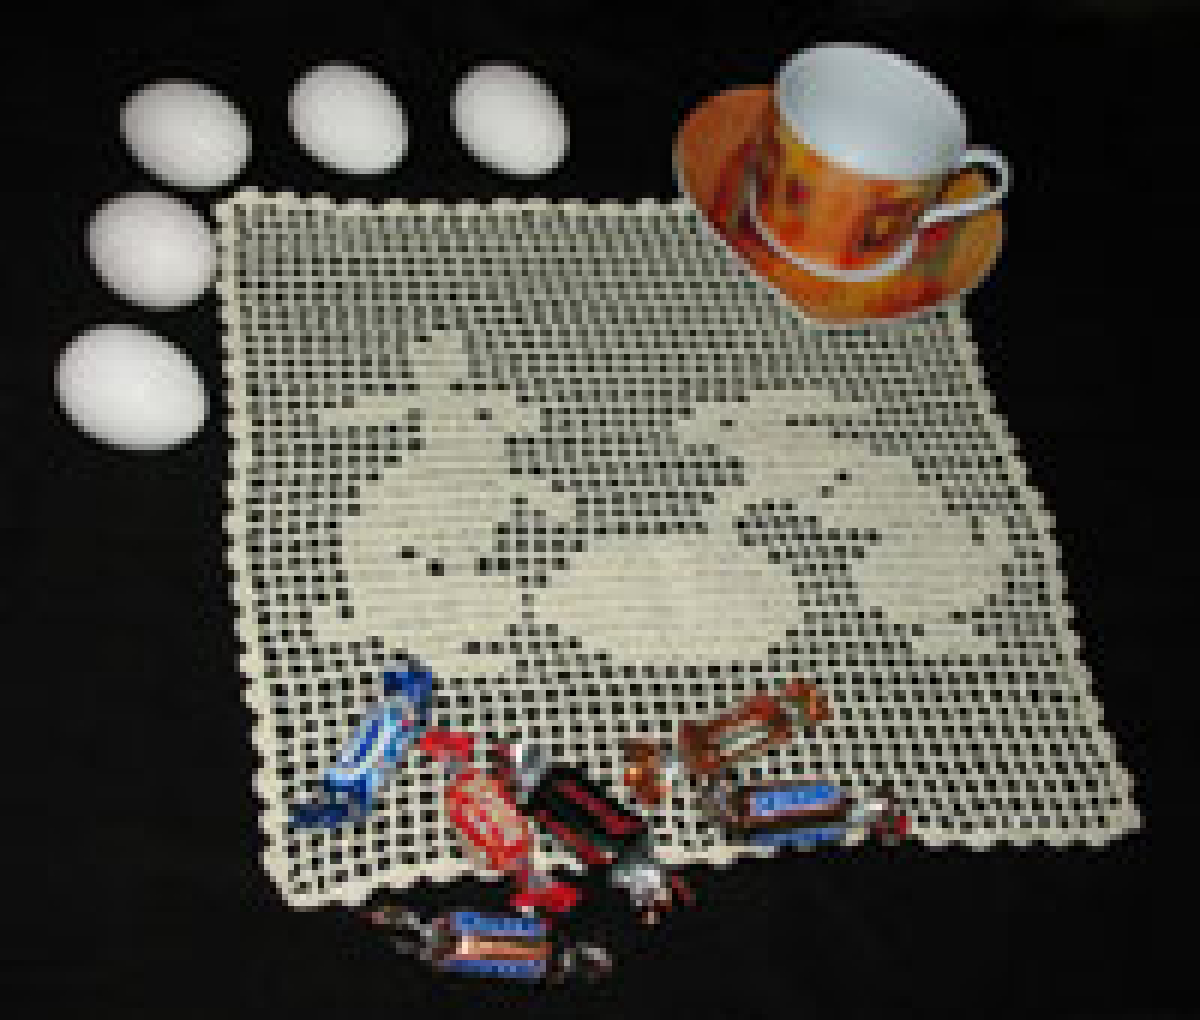 Easter bunny doily - Image